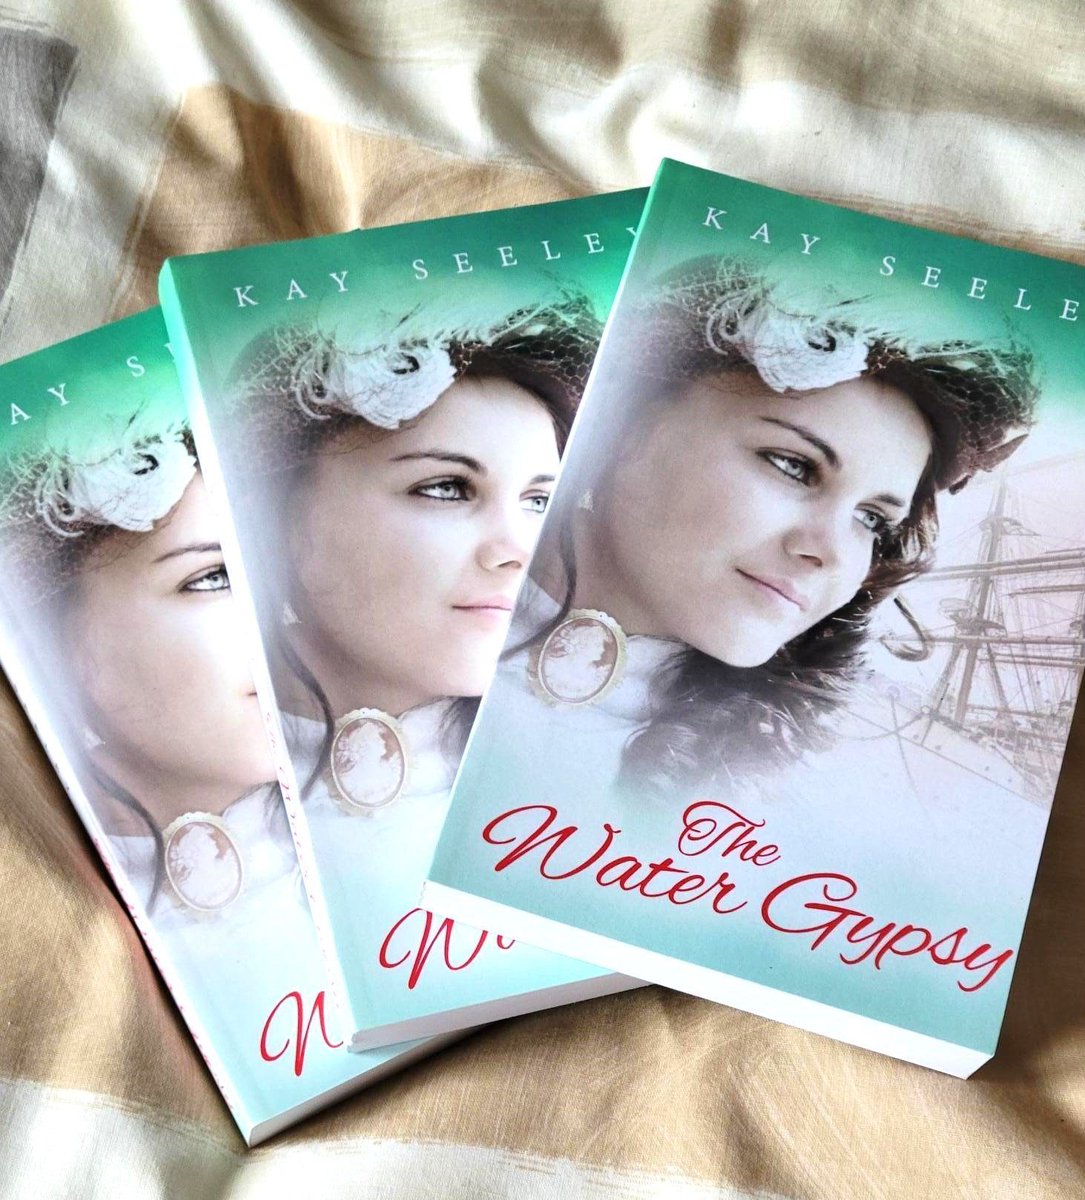 Cheers to ten years. #winabook in my #bookgiveaway to celebrate ten years since The Water Gypsy was published. Sign up to my newsletter by 30th May (UK only) to be in it to win it  buff.ly/4bTEUfY #prizedraw #freestuff #win #books #histfic